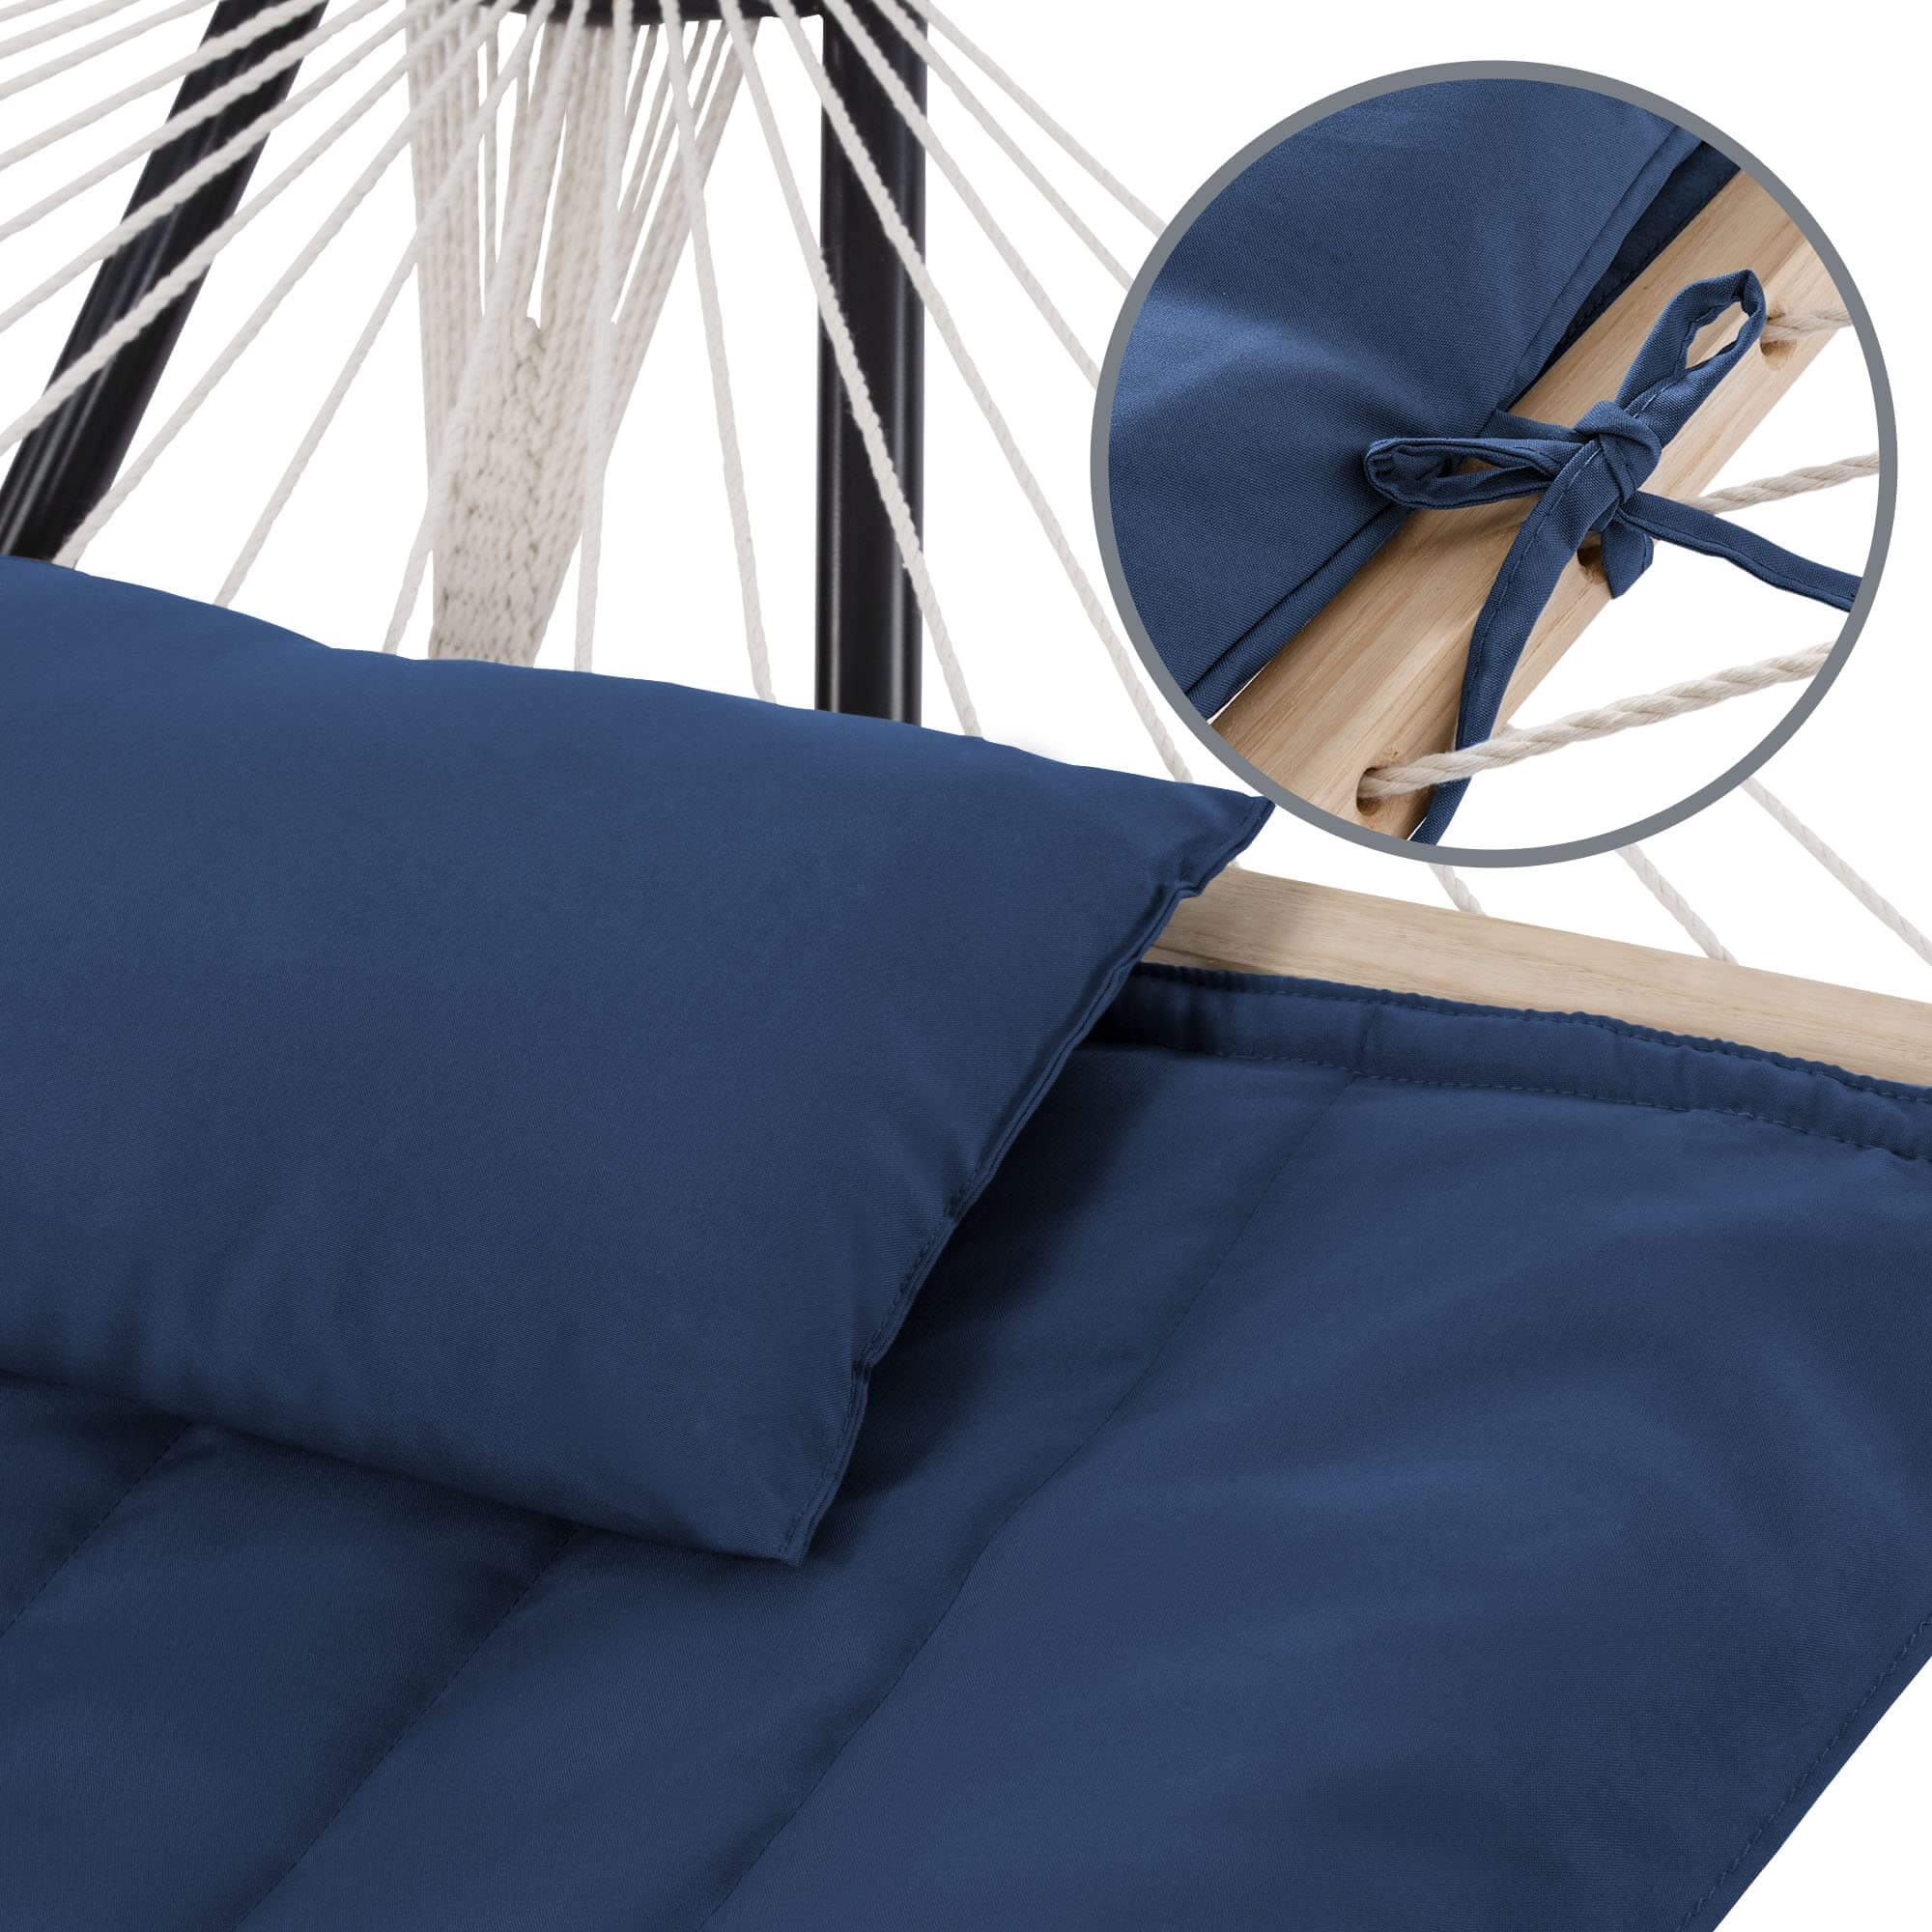 Double-Hammocks-with-Universal-Multi-Use-Steel-Stand#color_dark-blue